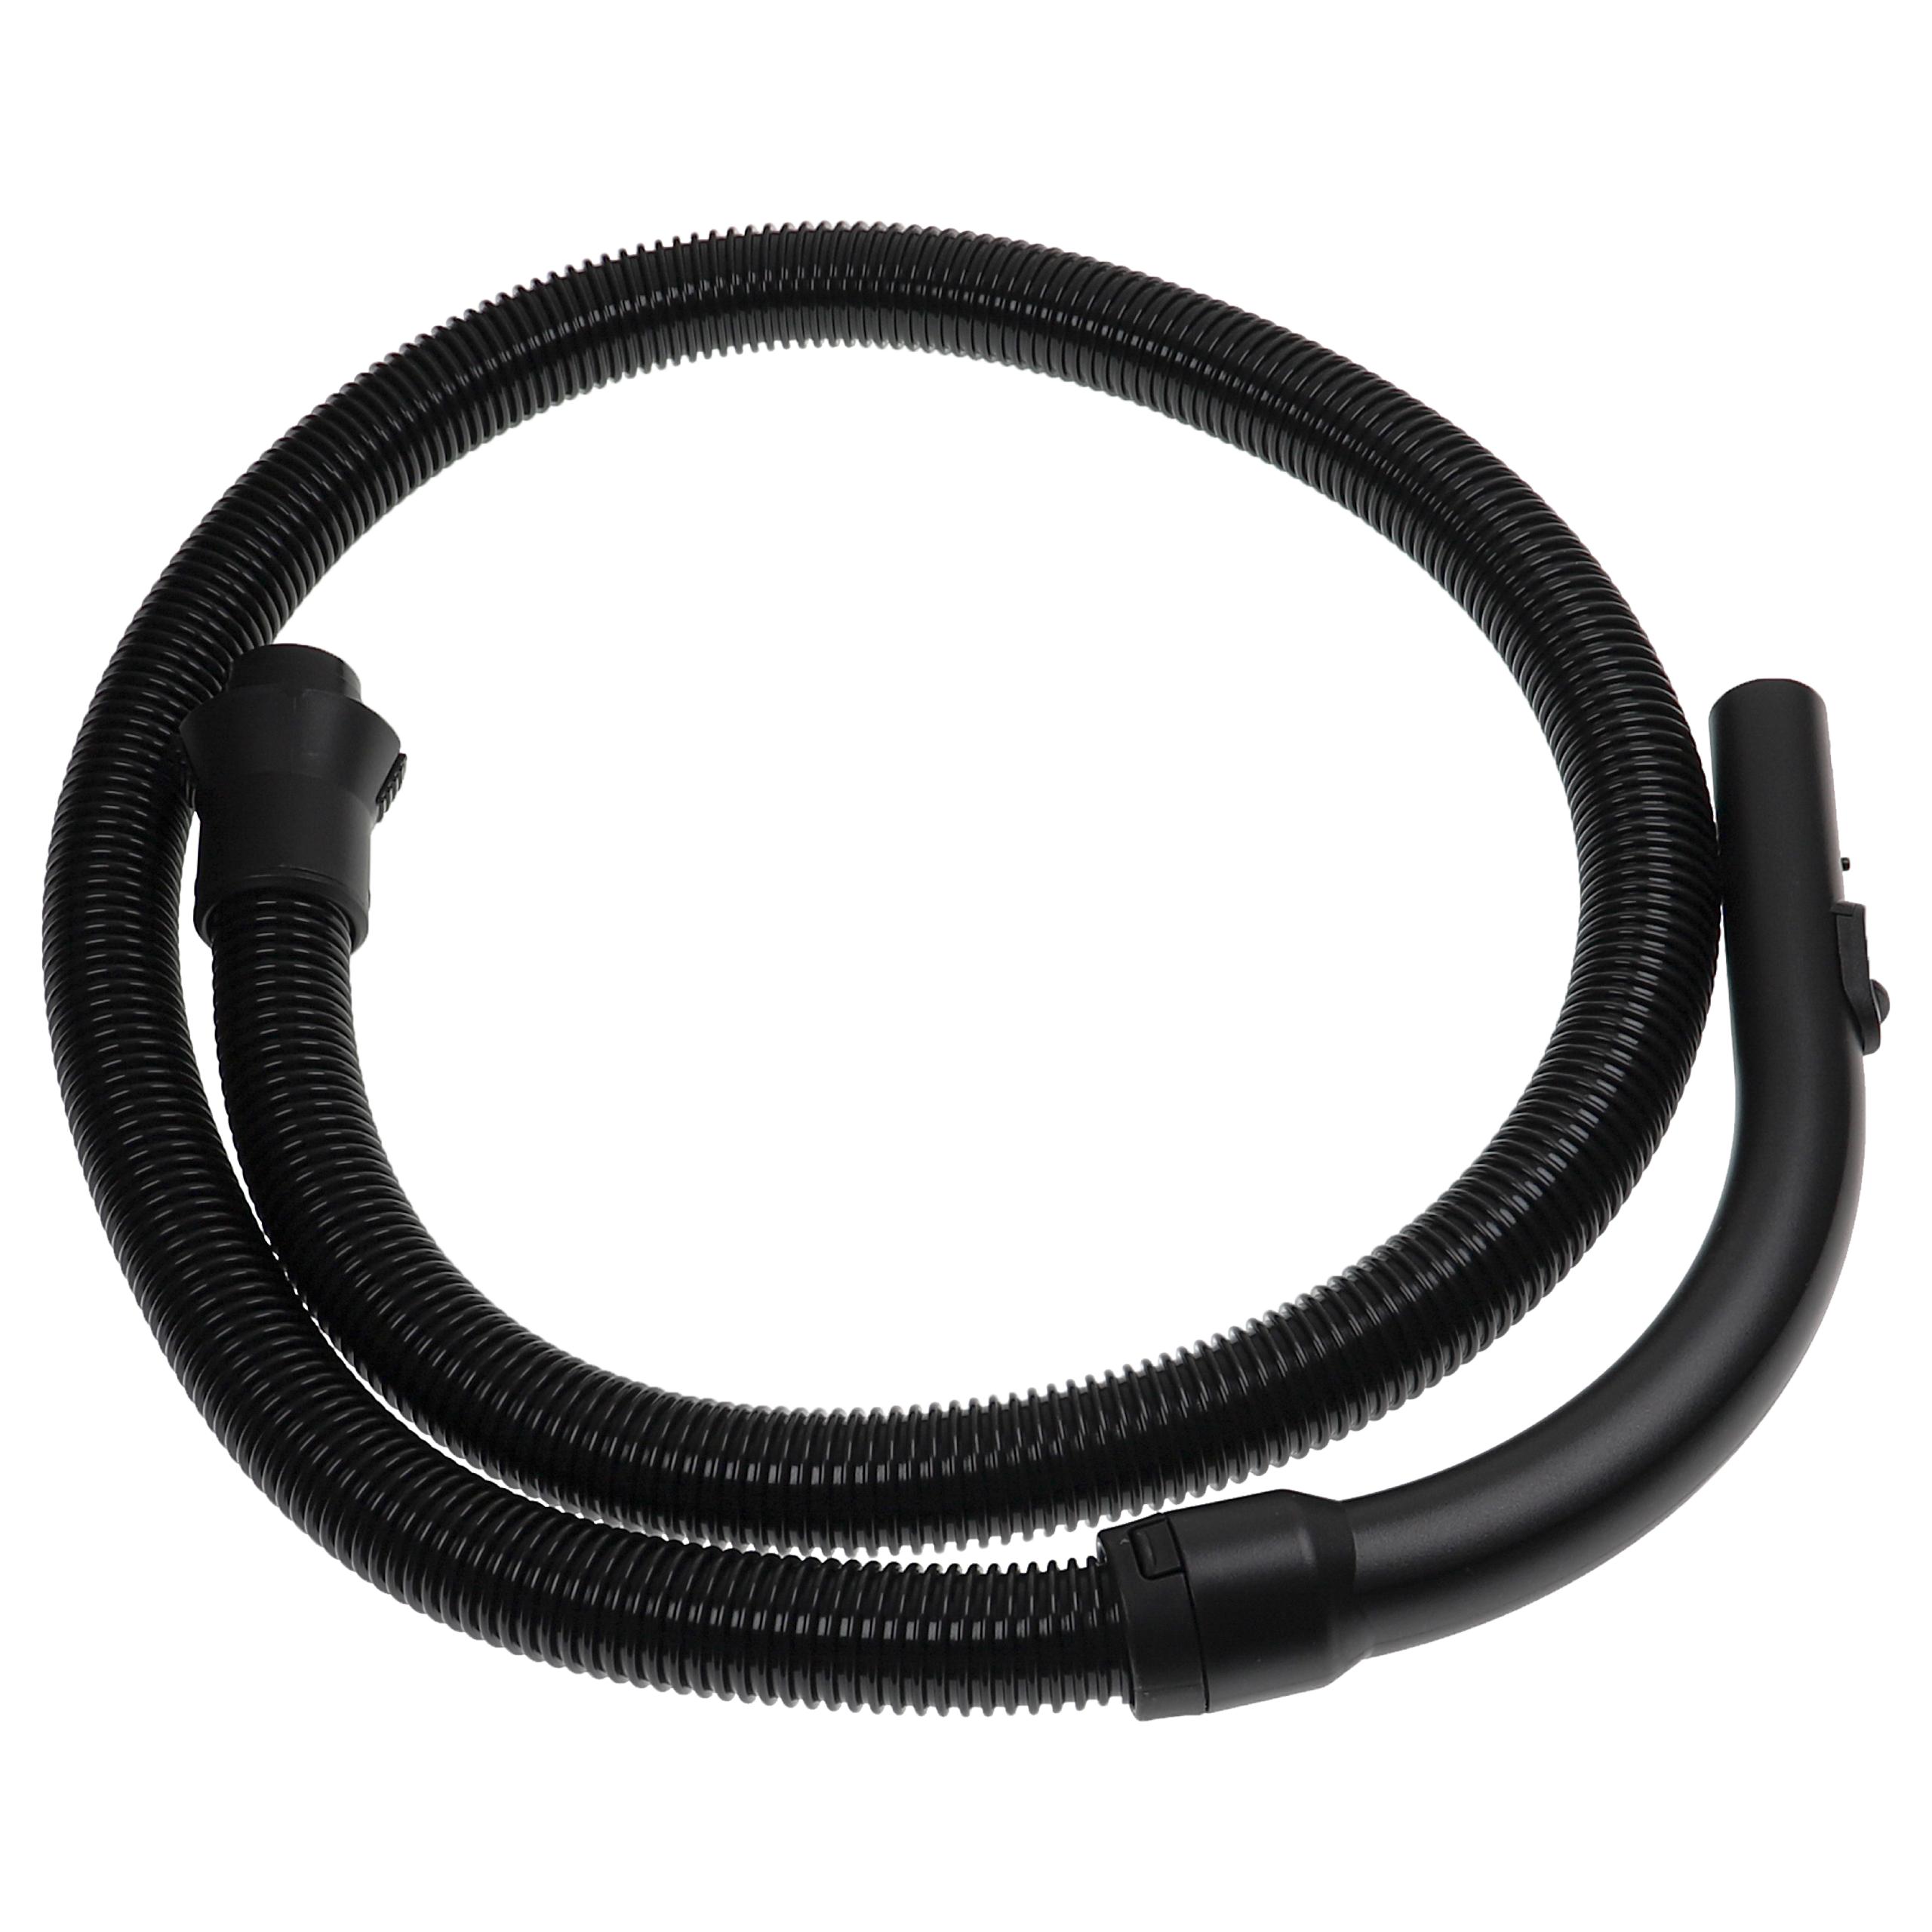 Hose as Replacement for Miele 07330631 - with Handle, 1.8 m long